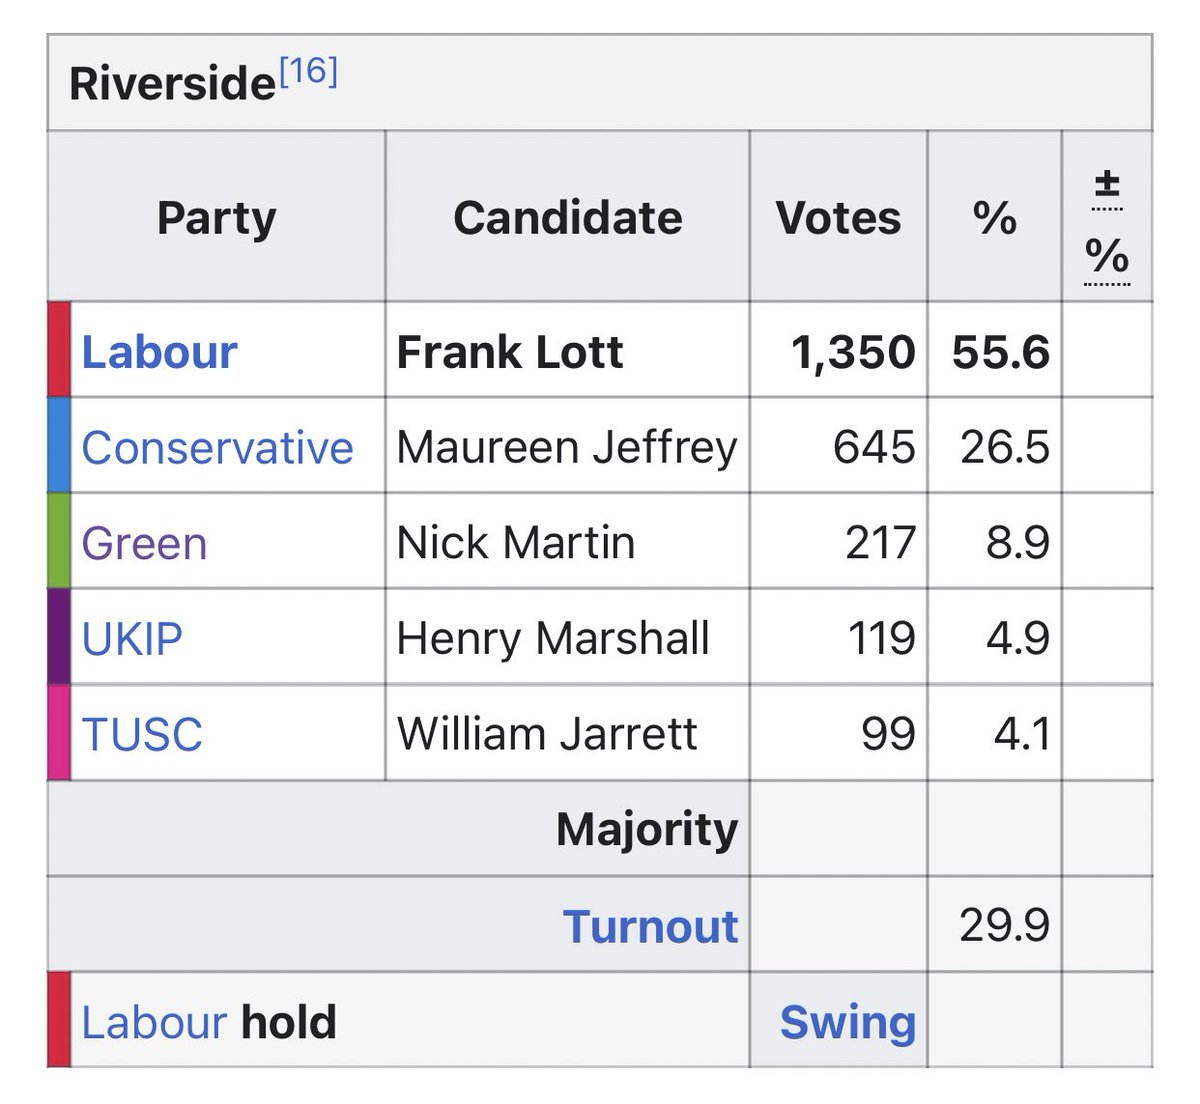 Riverside ward is again in line with the general trend throughout North Tyneside... Labour vote up by +8.0% whilst Tory vote increased by a huge +13.8%. These changes won’t worry Labour too much here. But it does indicate Labour need more on the ground activism.